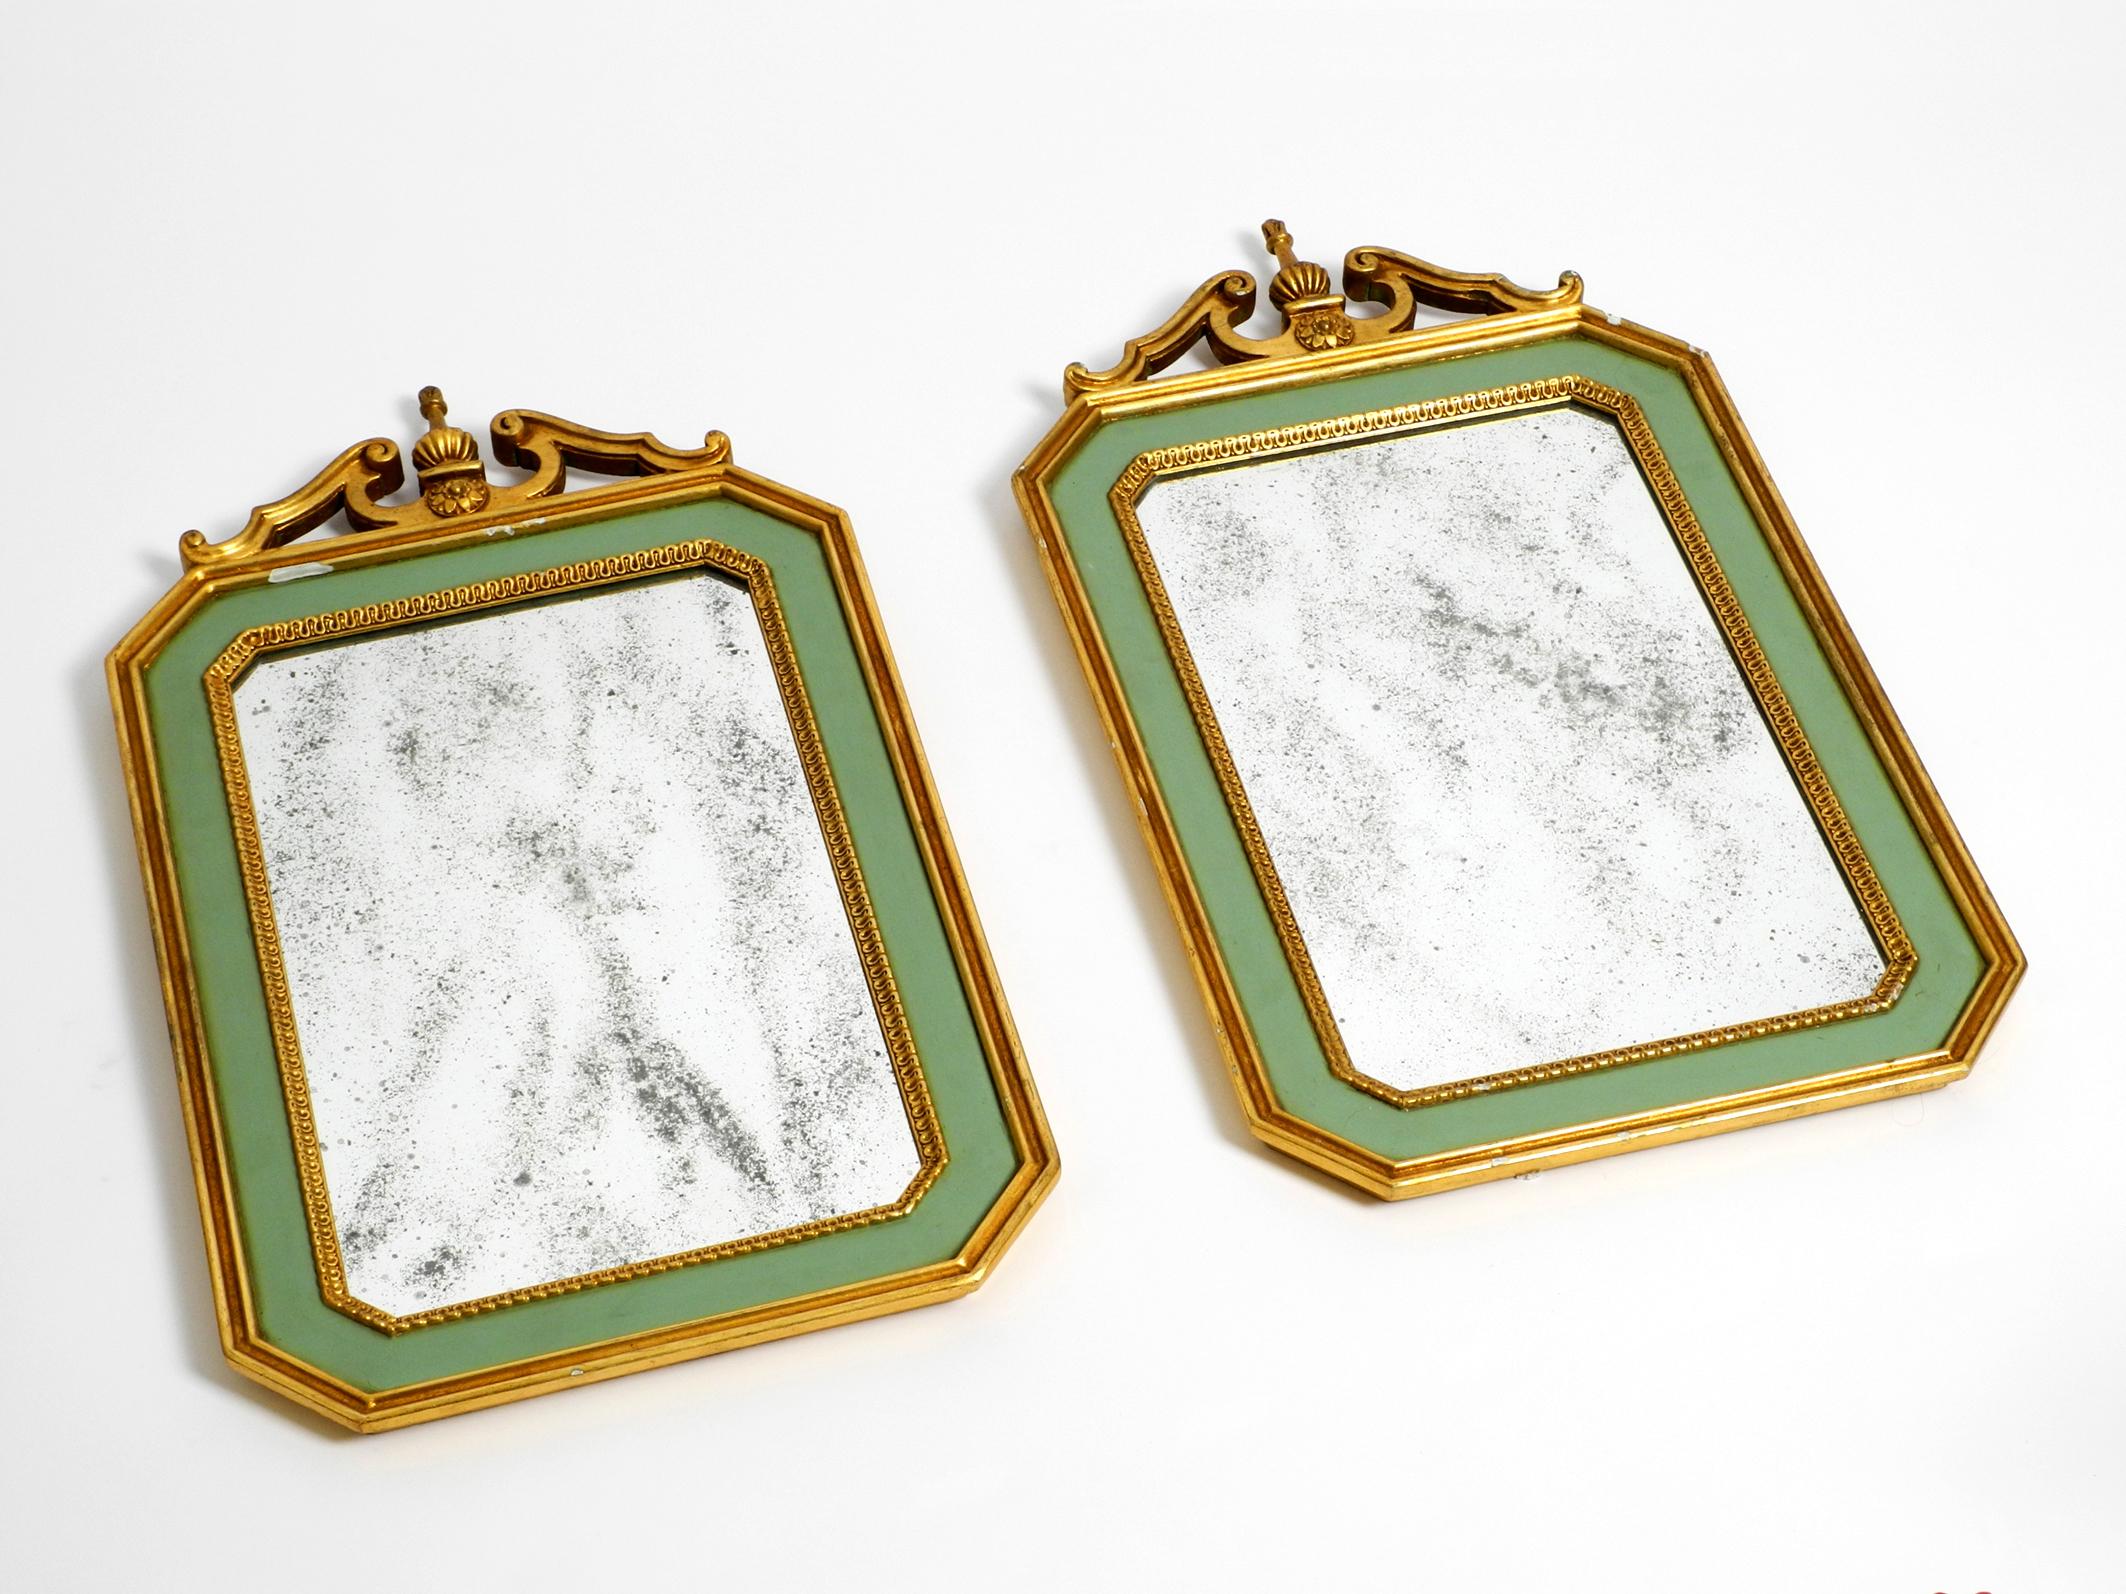 Two beautiful mid century wall mirrors made of wood.
Very high quality workmanship with a great patina. Made in Italy.
Frame is made entirely of wood, partly painted green and partly gold-plated.
Each mirror glass has become spotty blind.
Great